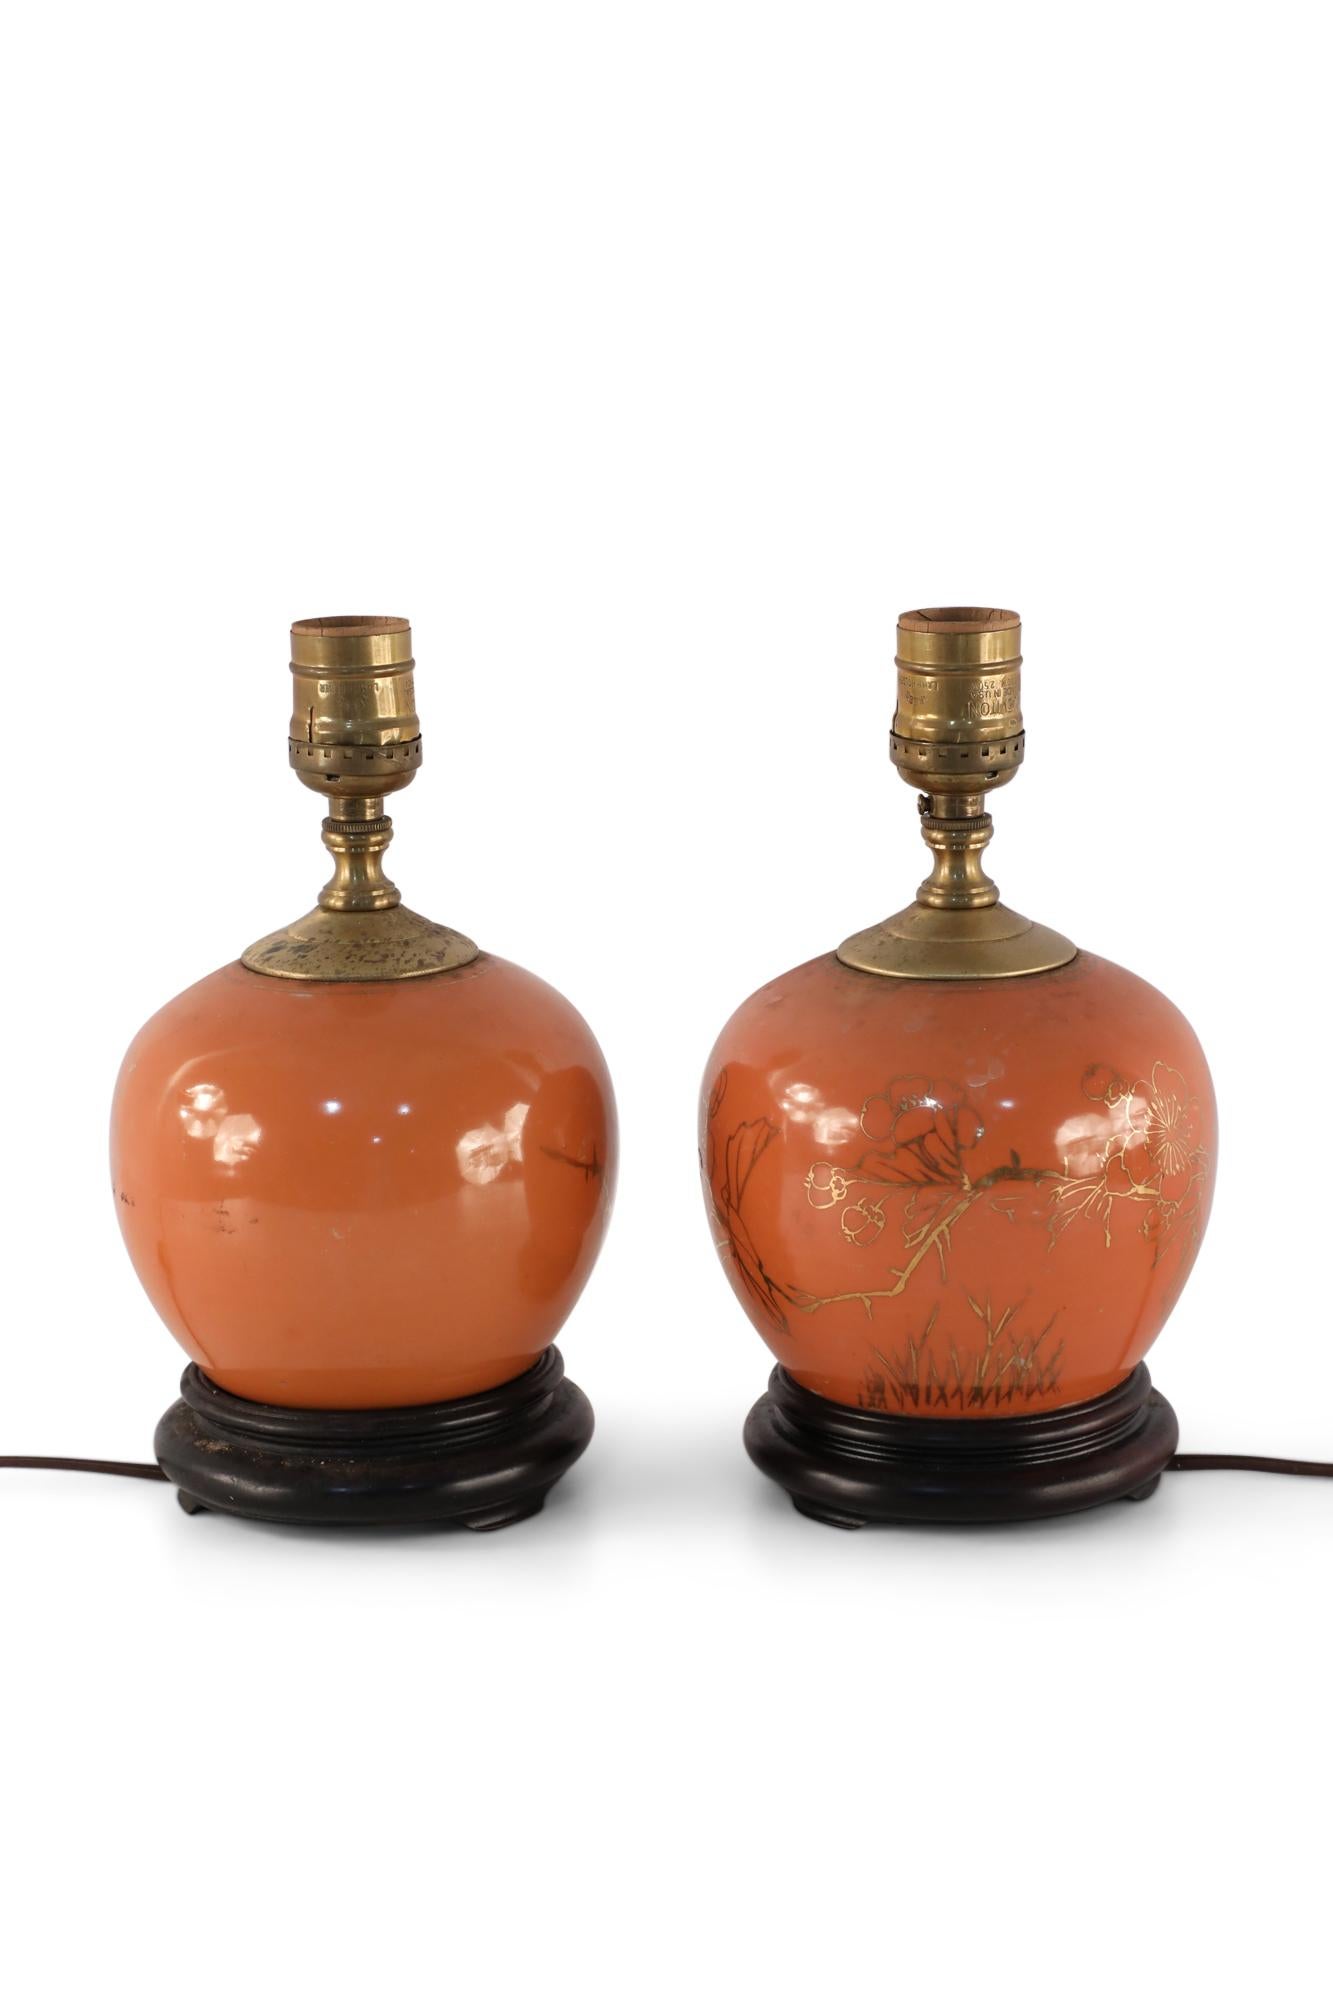 Pair of antique Chinese (Early 20th Century) round table lamps made from orange, luster porcelain vases with gold floral designs, mounted on brown wooden bases with patinated brass hardware.